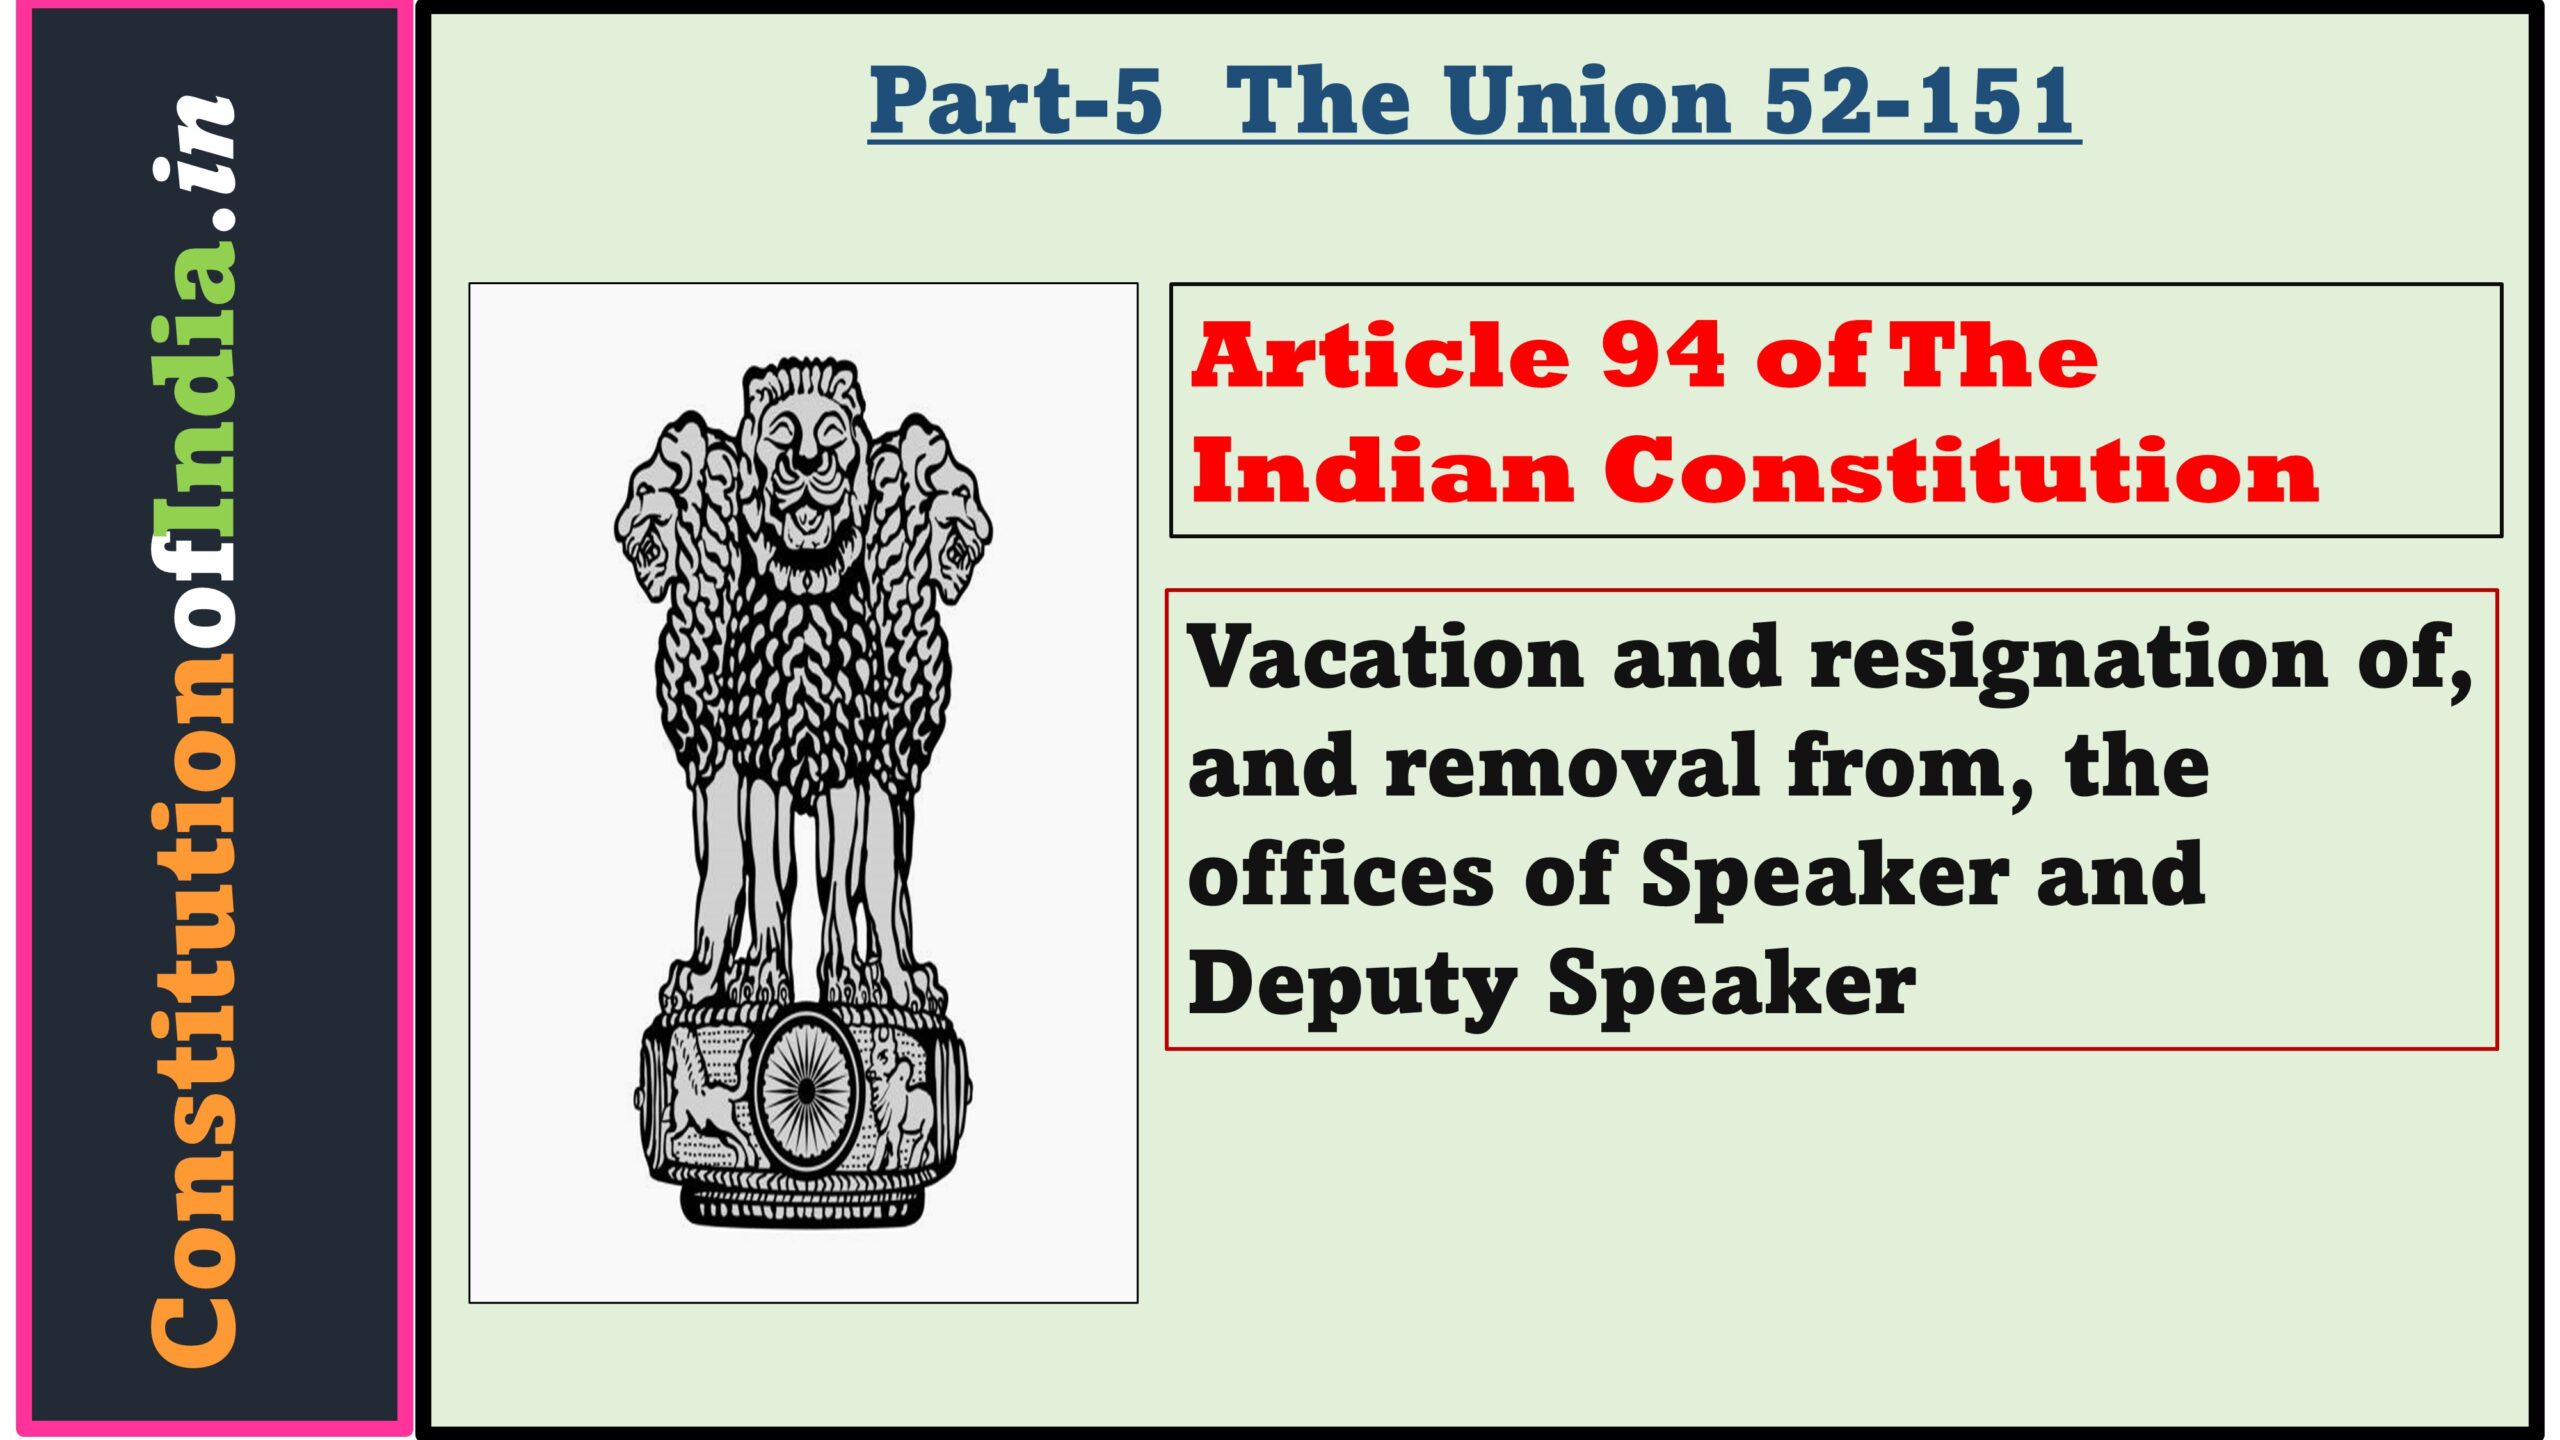 Article 94 of The Indian Constitution